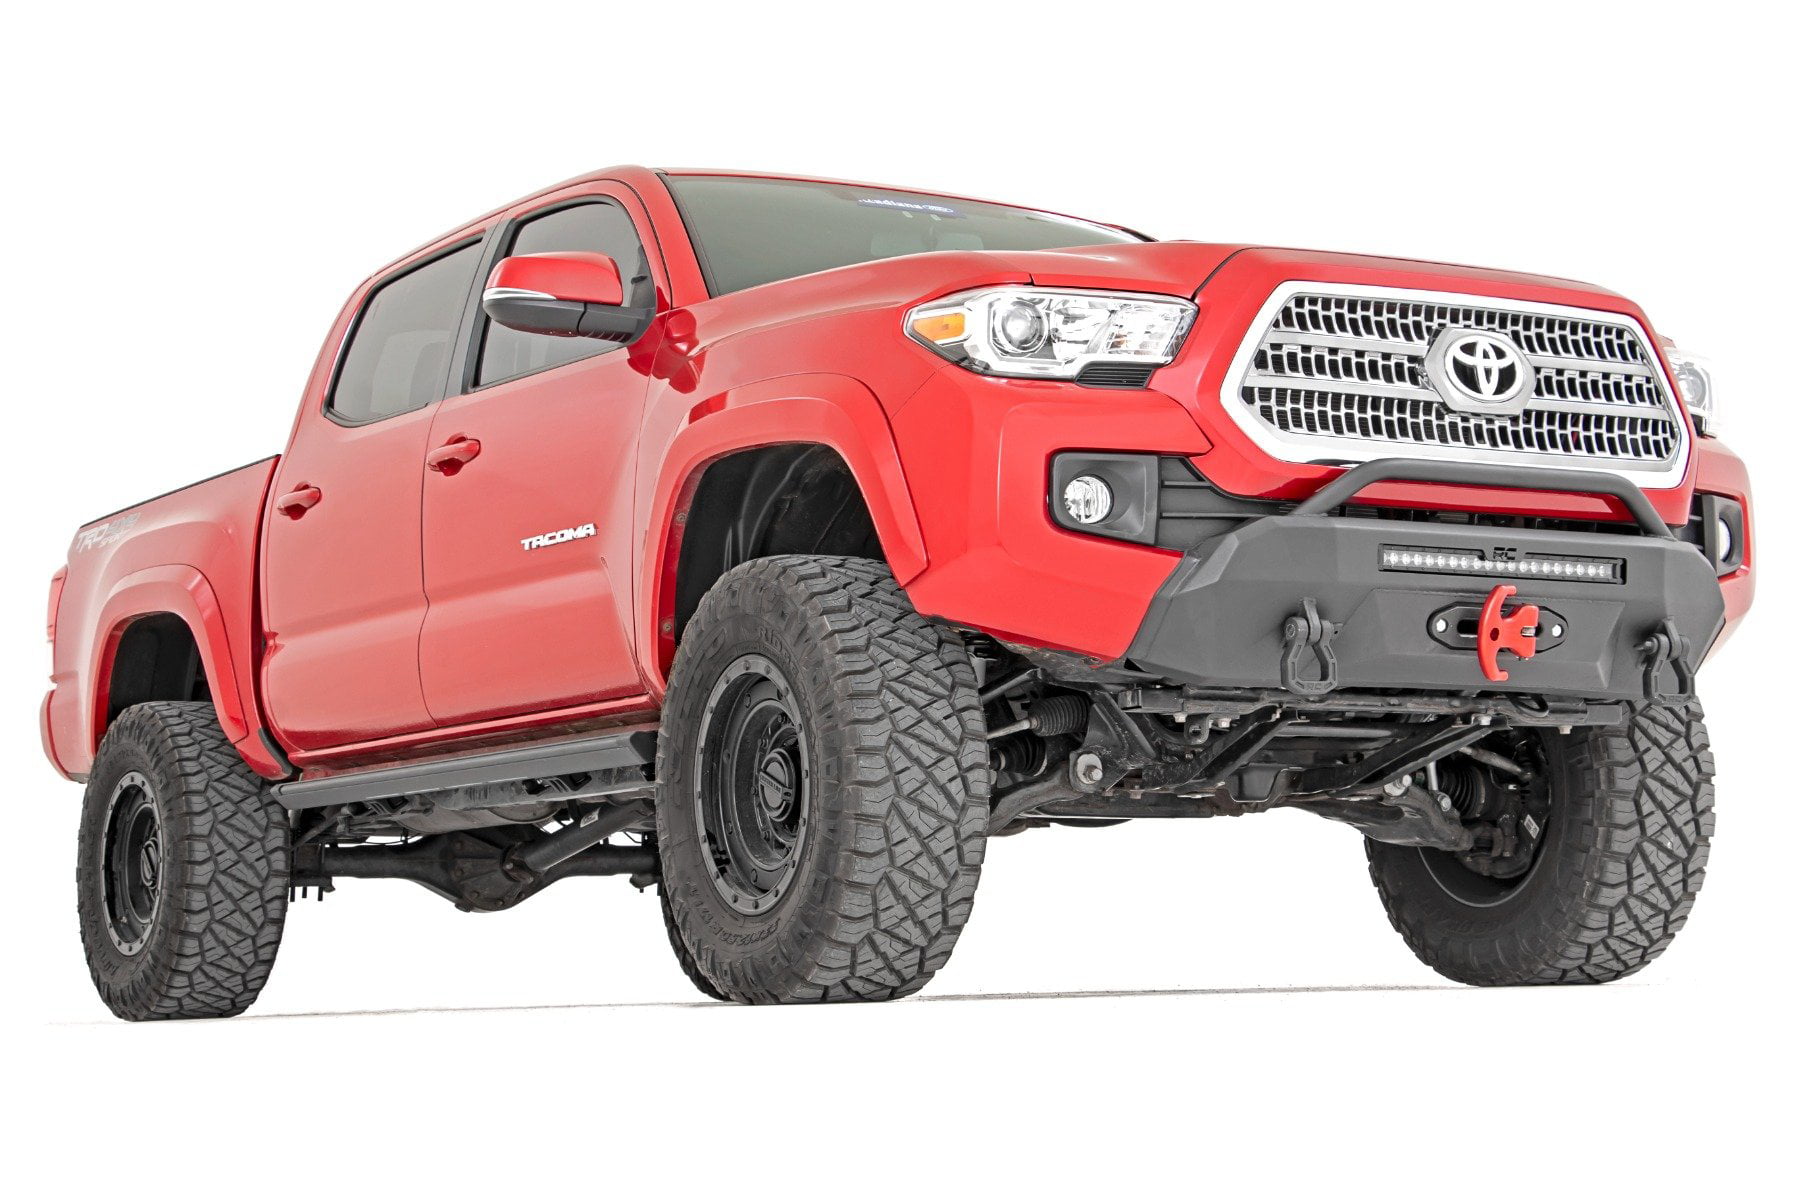 FOR 2012-2015 TACOMA FRONT BUMPER COVER PRIMED EXTENSION END W/FLARE HOLE 3PCS